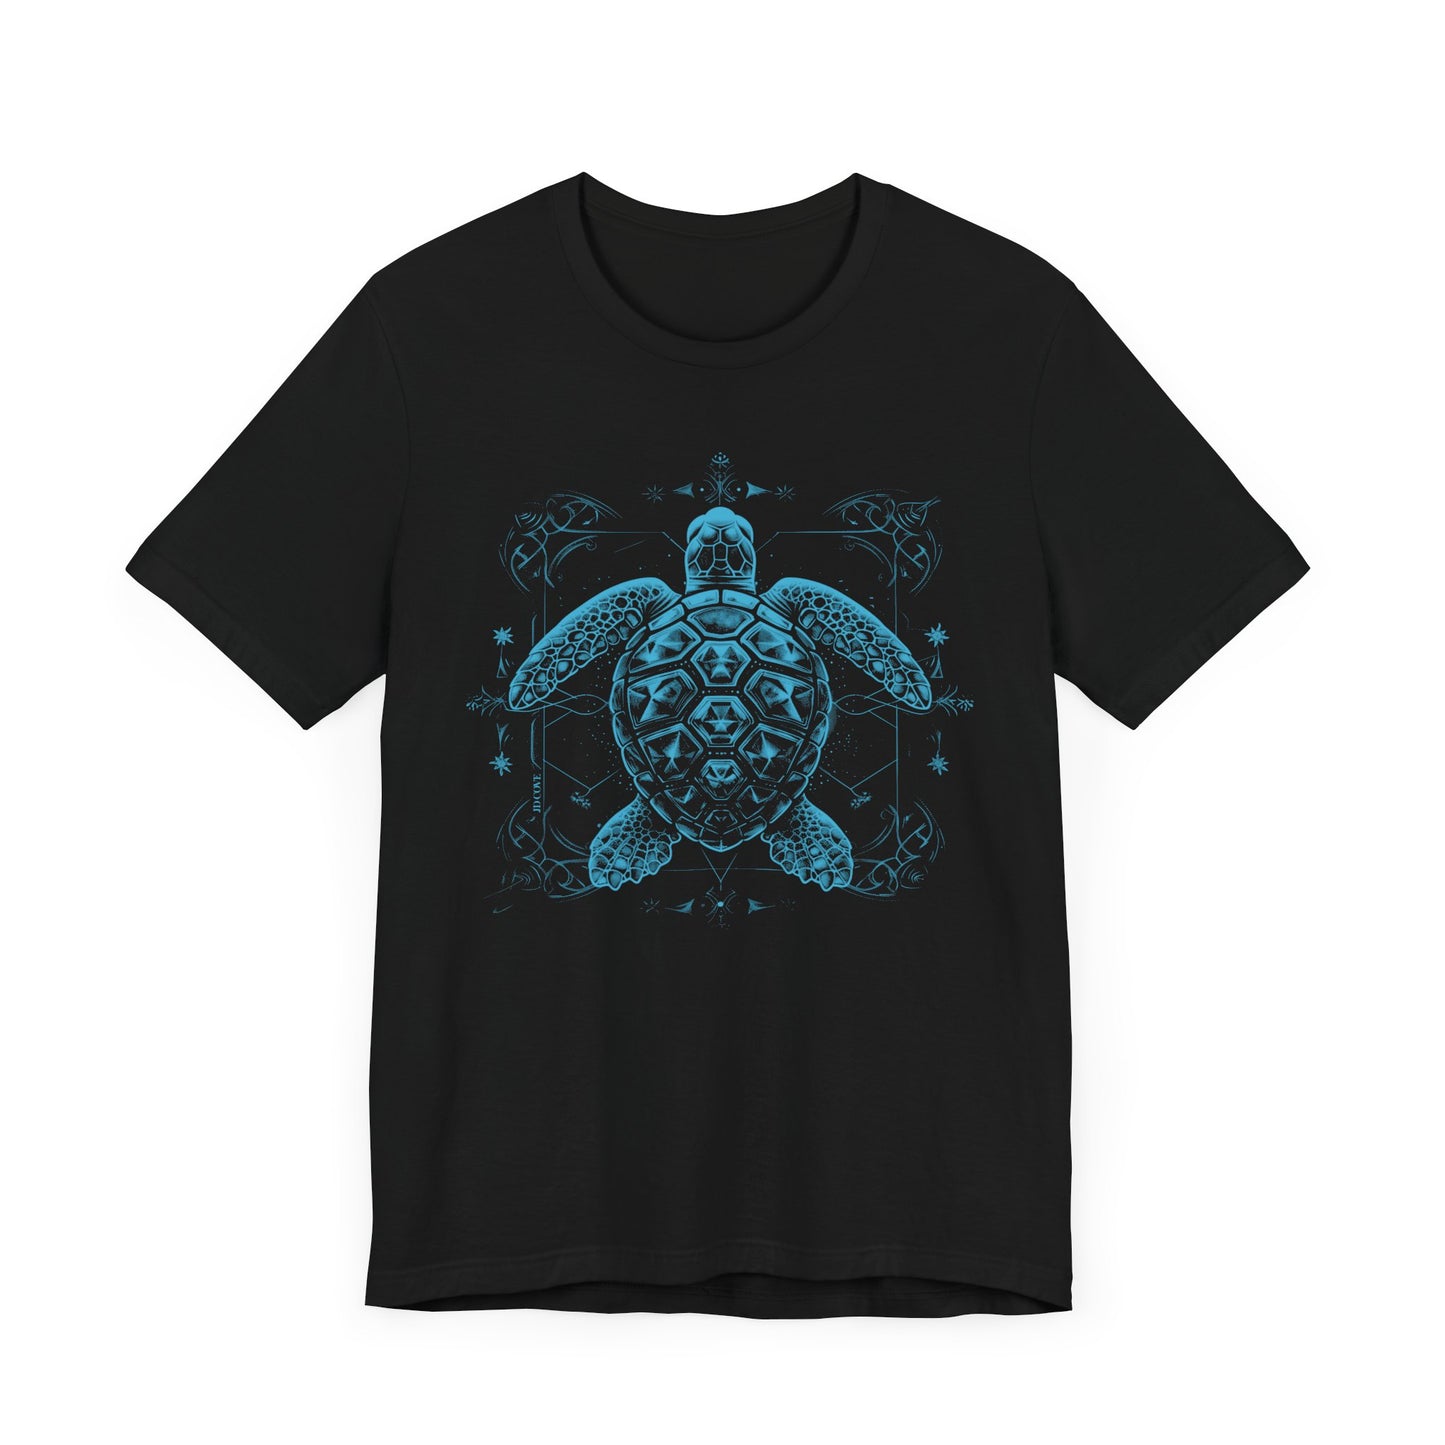 Wise Sea Turtle Graphic Tee - Unisex Eco-Friendly Cotton Shirt by JD Cove